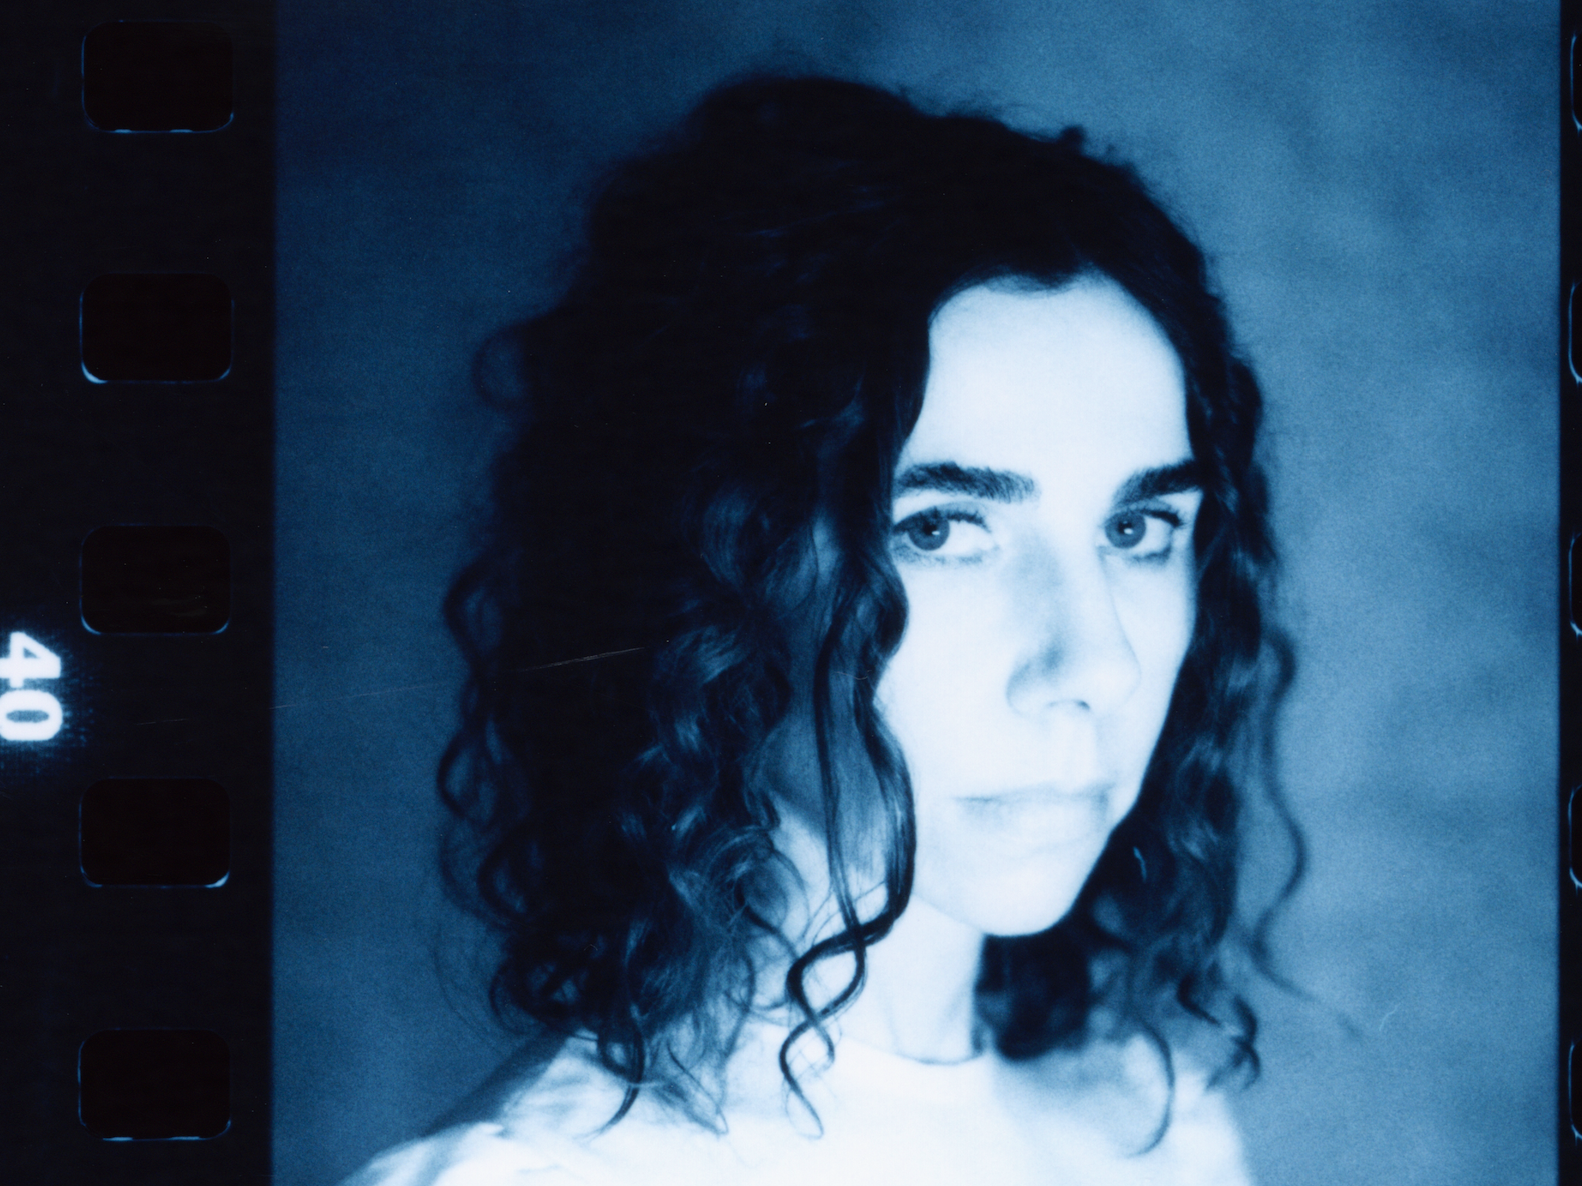 PJ HARVEY –  I Inside The Old Year Dying